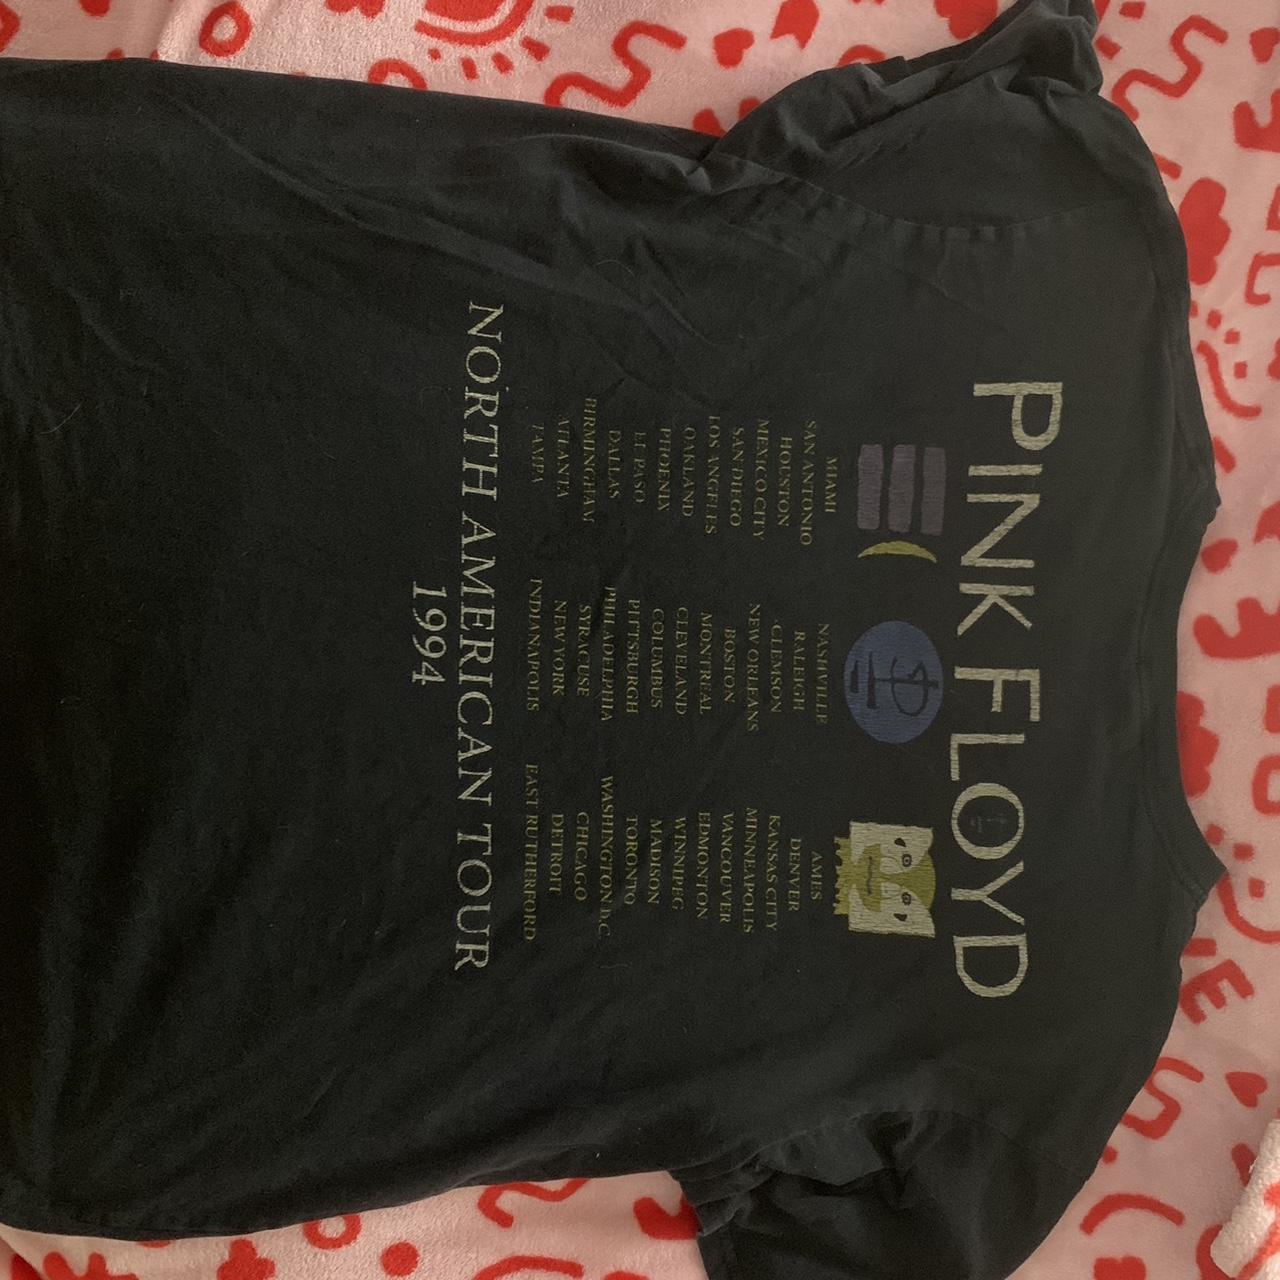 Pink Floyd, North American tour reprint., Tag says XL...